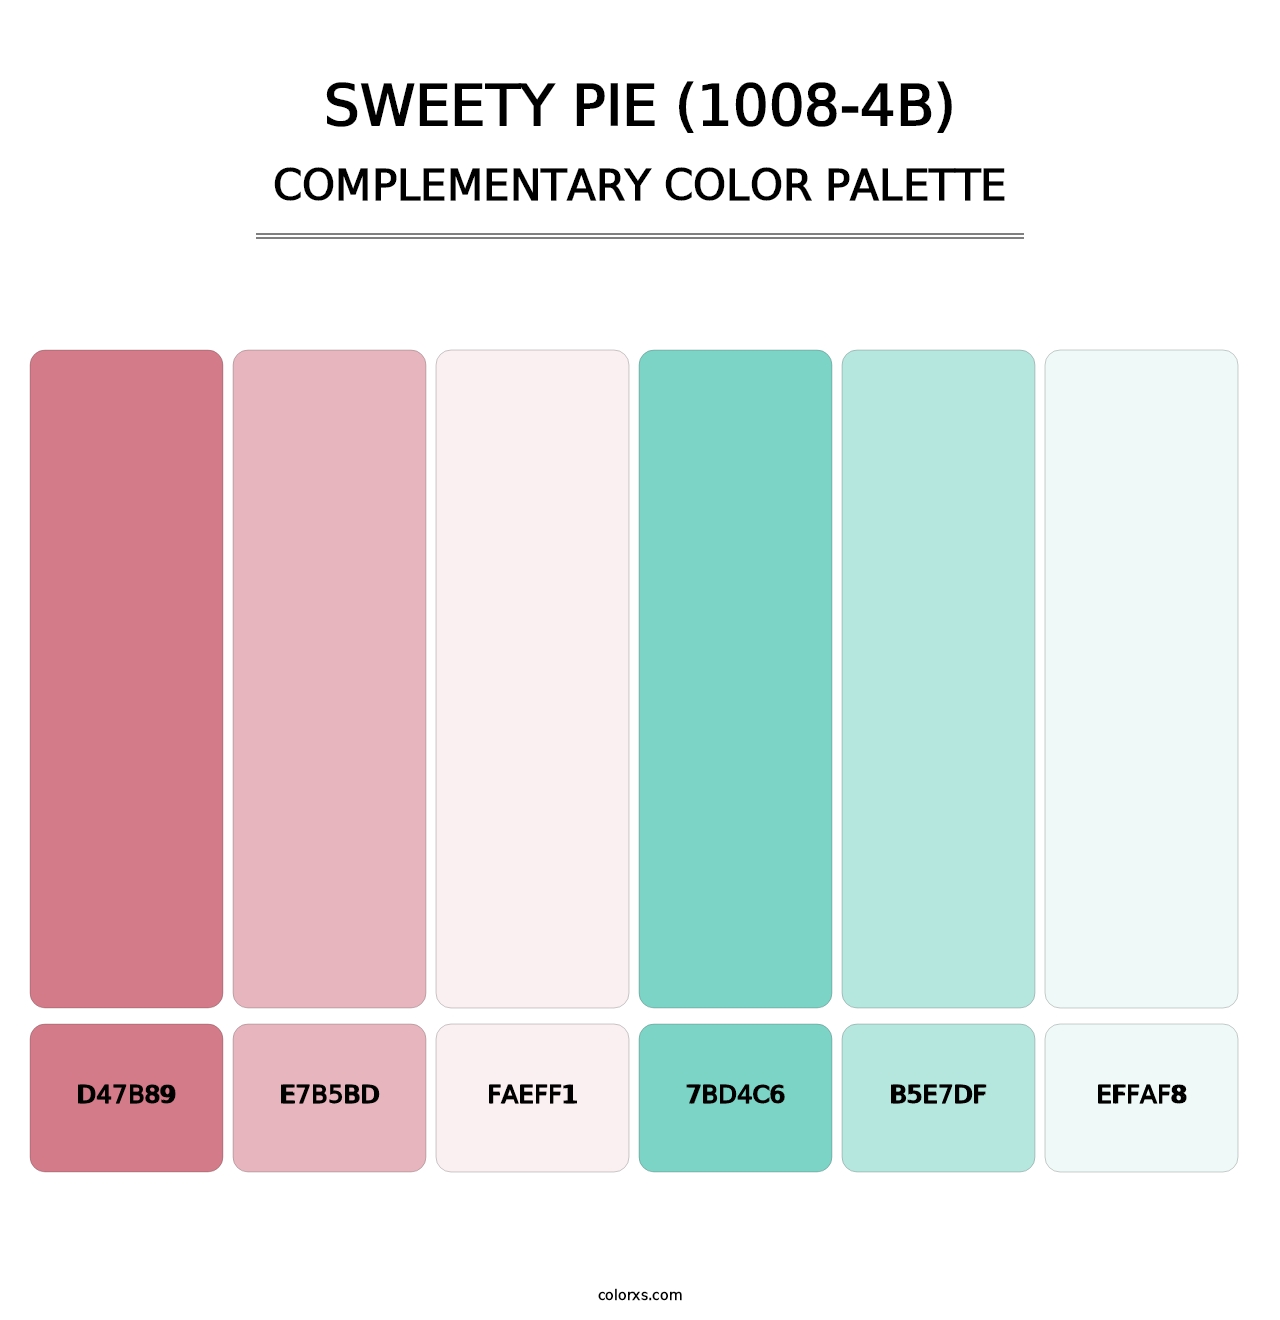 Sweety Pie (1008-4B) - Complementary Color Palette